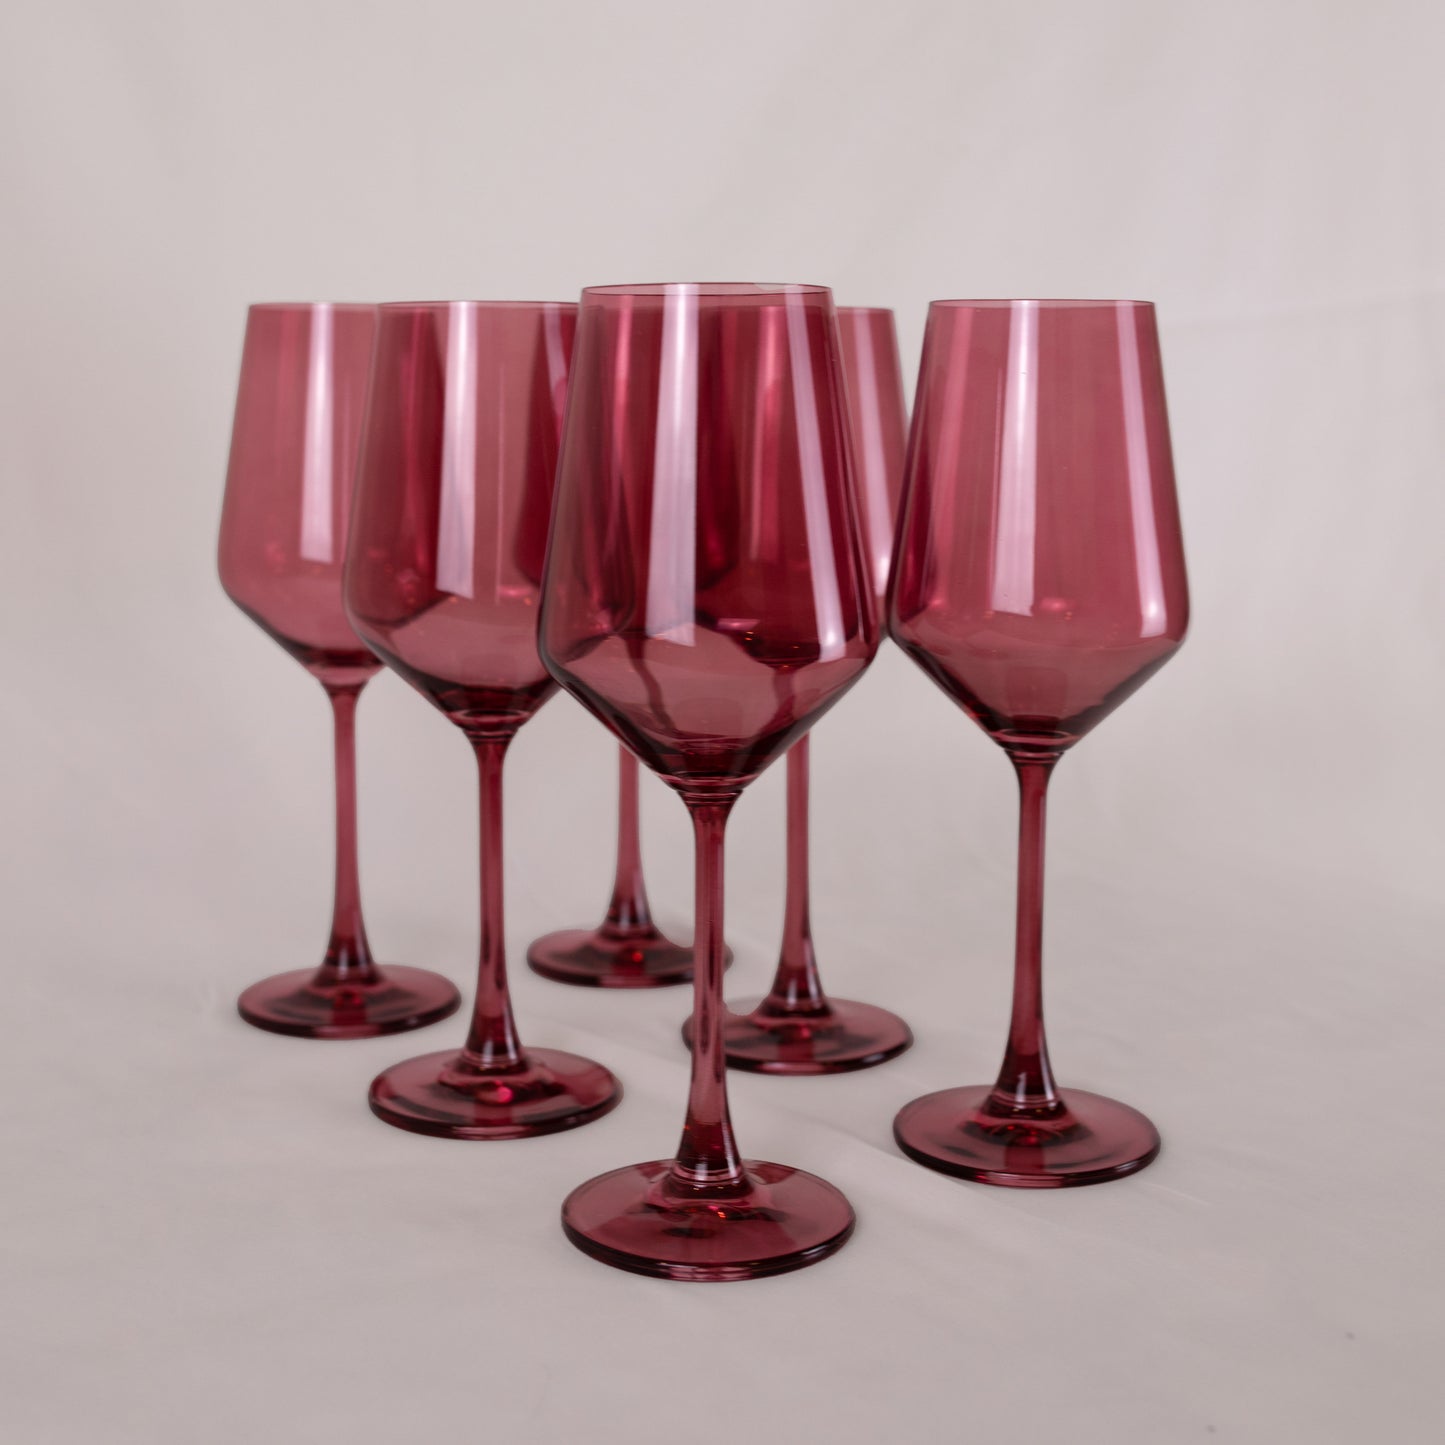 Mauvelous Wine Glasses - Set of 6 Side view 